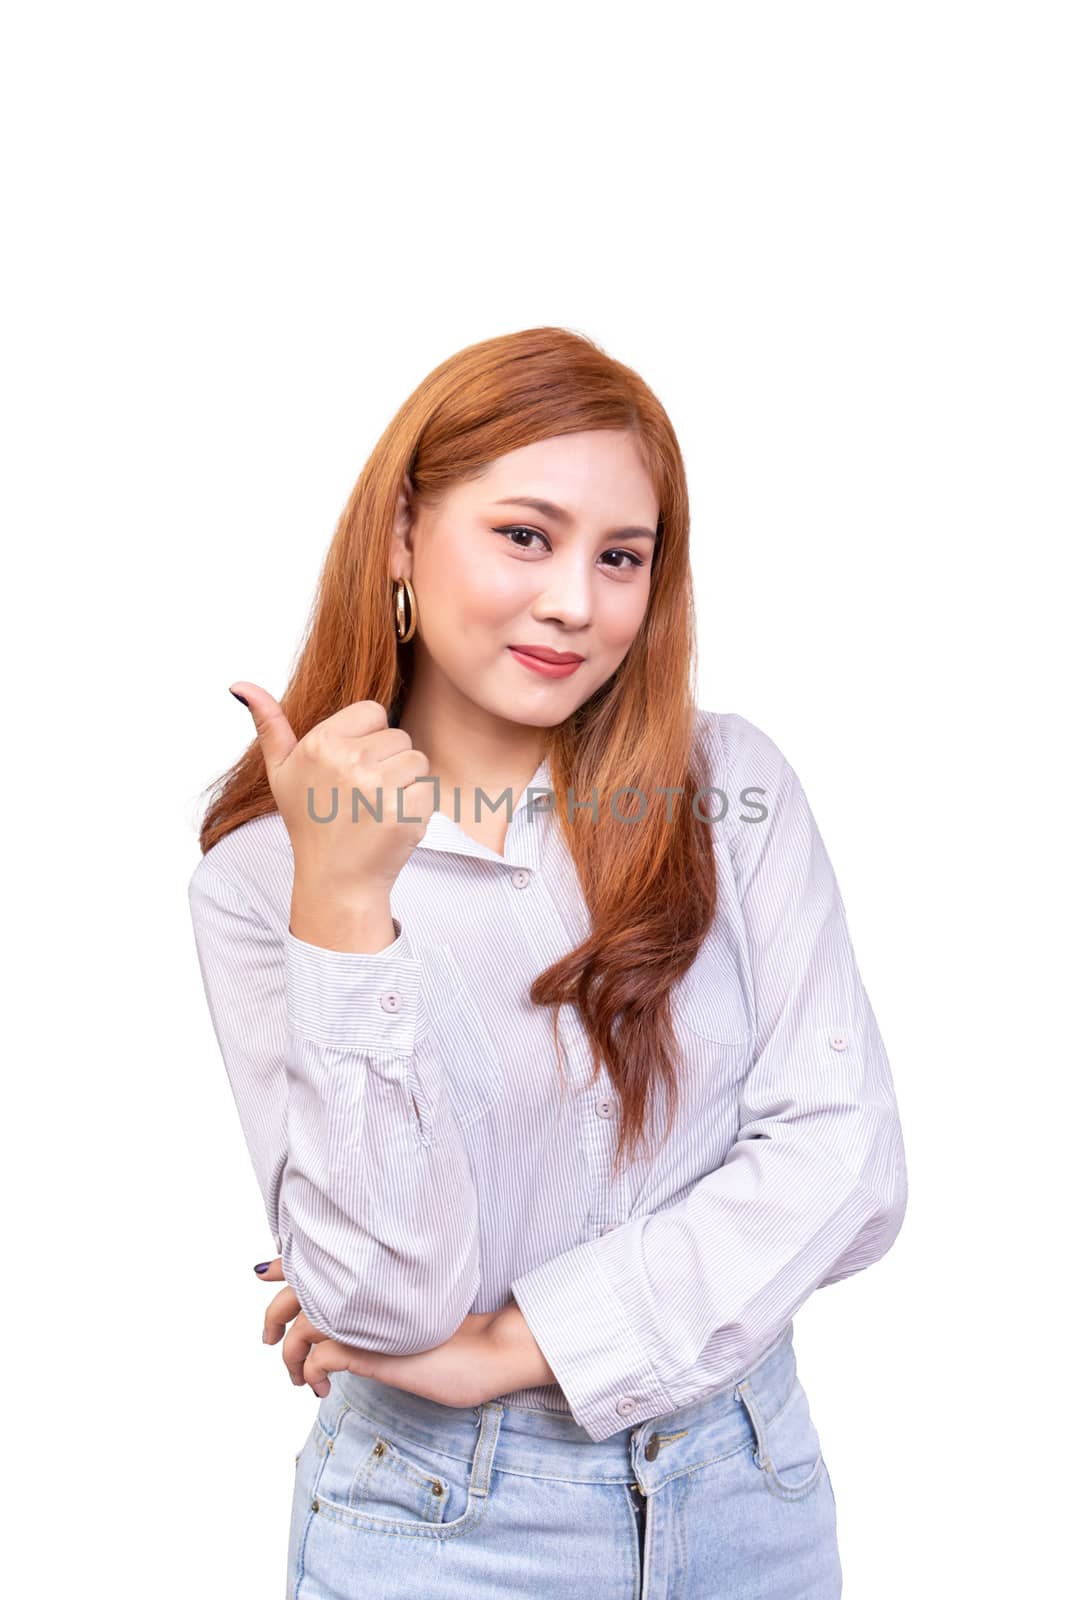 cheerful Asian woman looking at the camera with happy expression. showing thumbs-up with one hand, body language for like emotion. isolated on white background with clipping path, studio shot by asiandelight